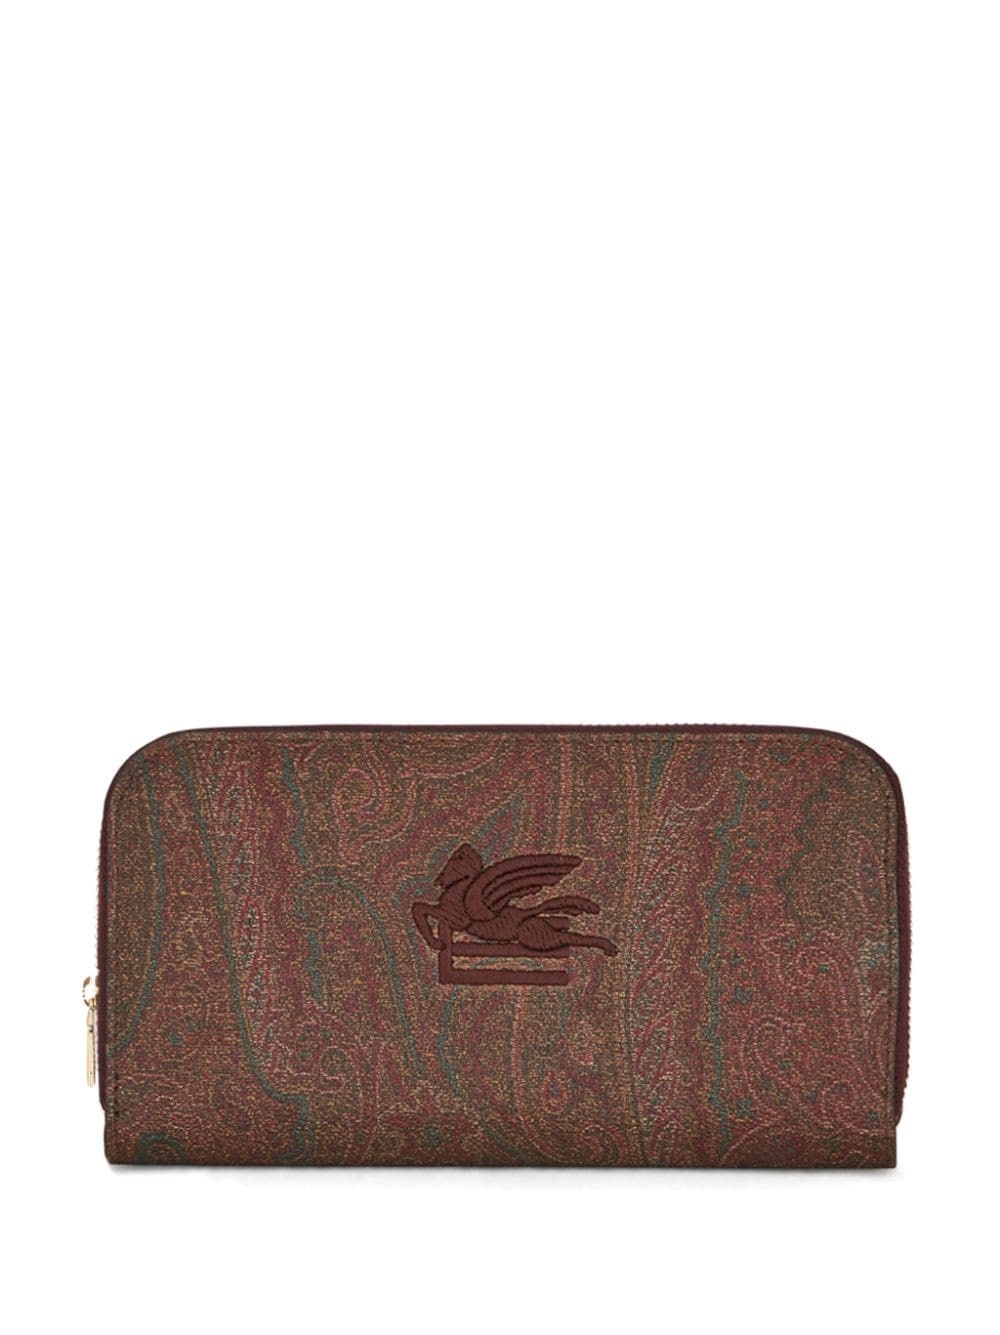 logo-embroidered leather wallet - 1